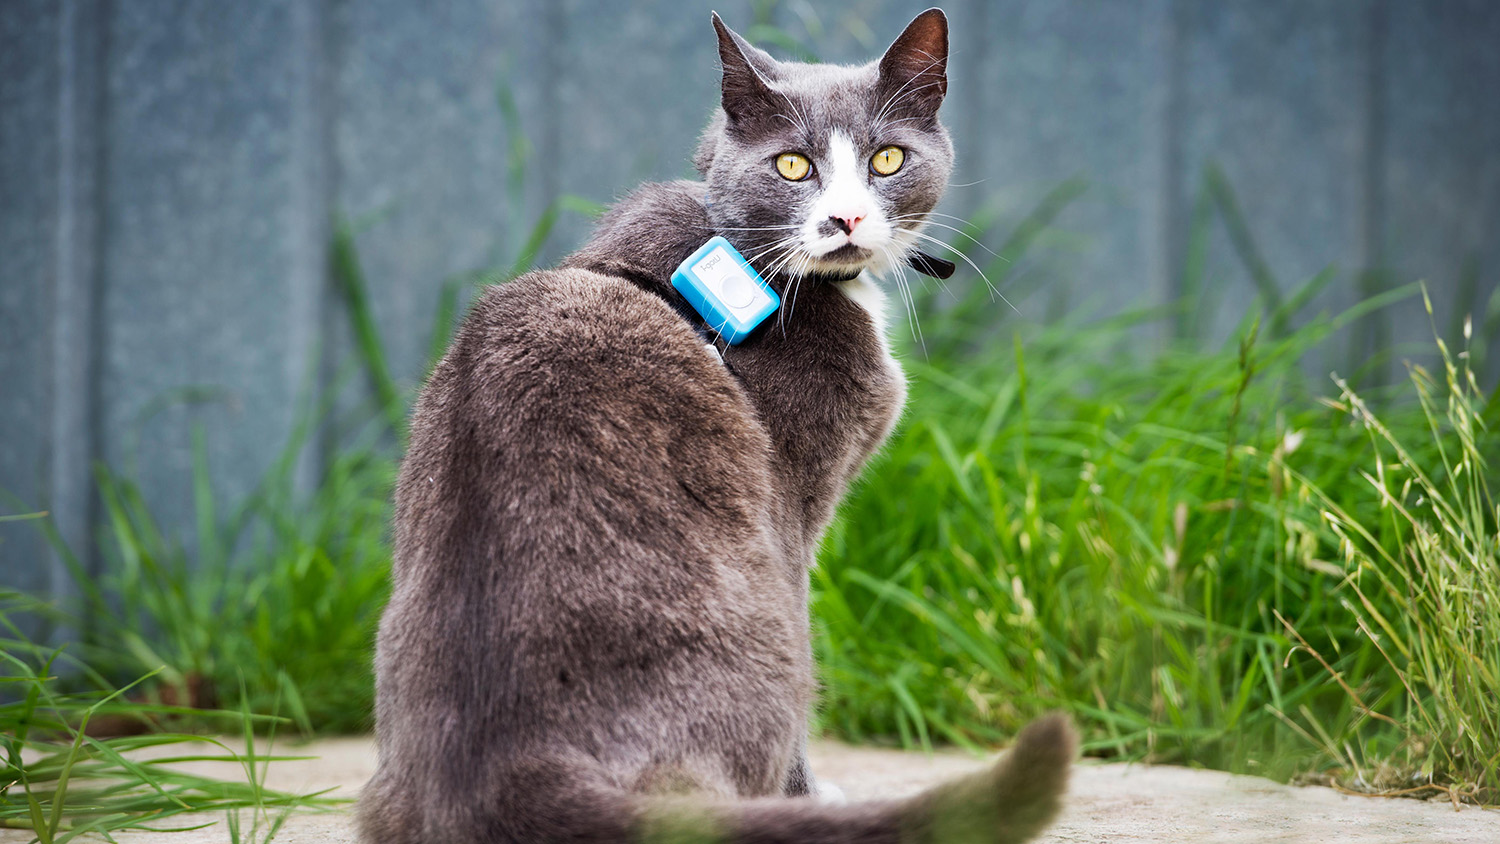 Cat with GPS tracking device on collar.